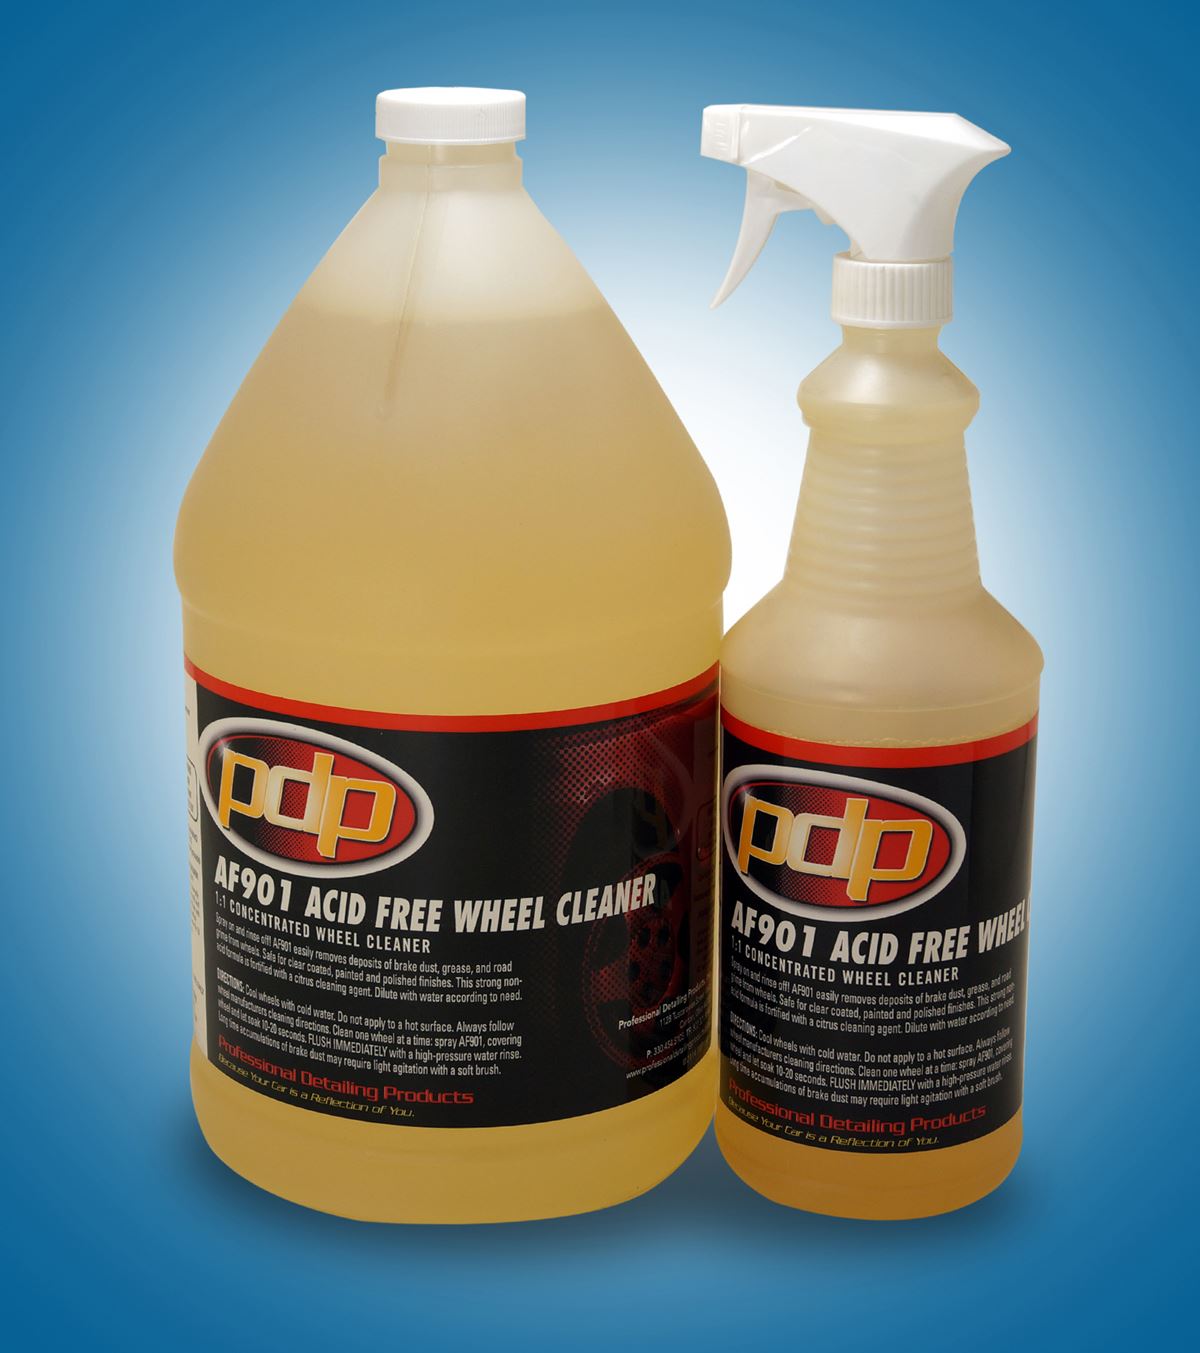 ACID FREE WHEEL CLEANER. Professional Detailing Products, Because Your Car  is a Reflection of You